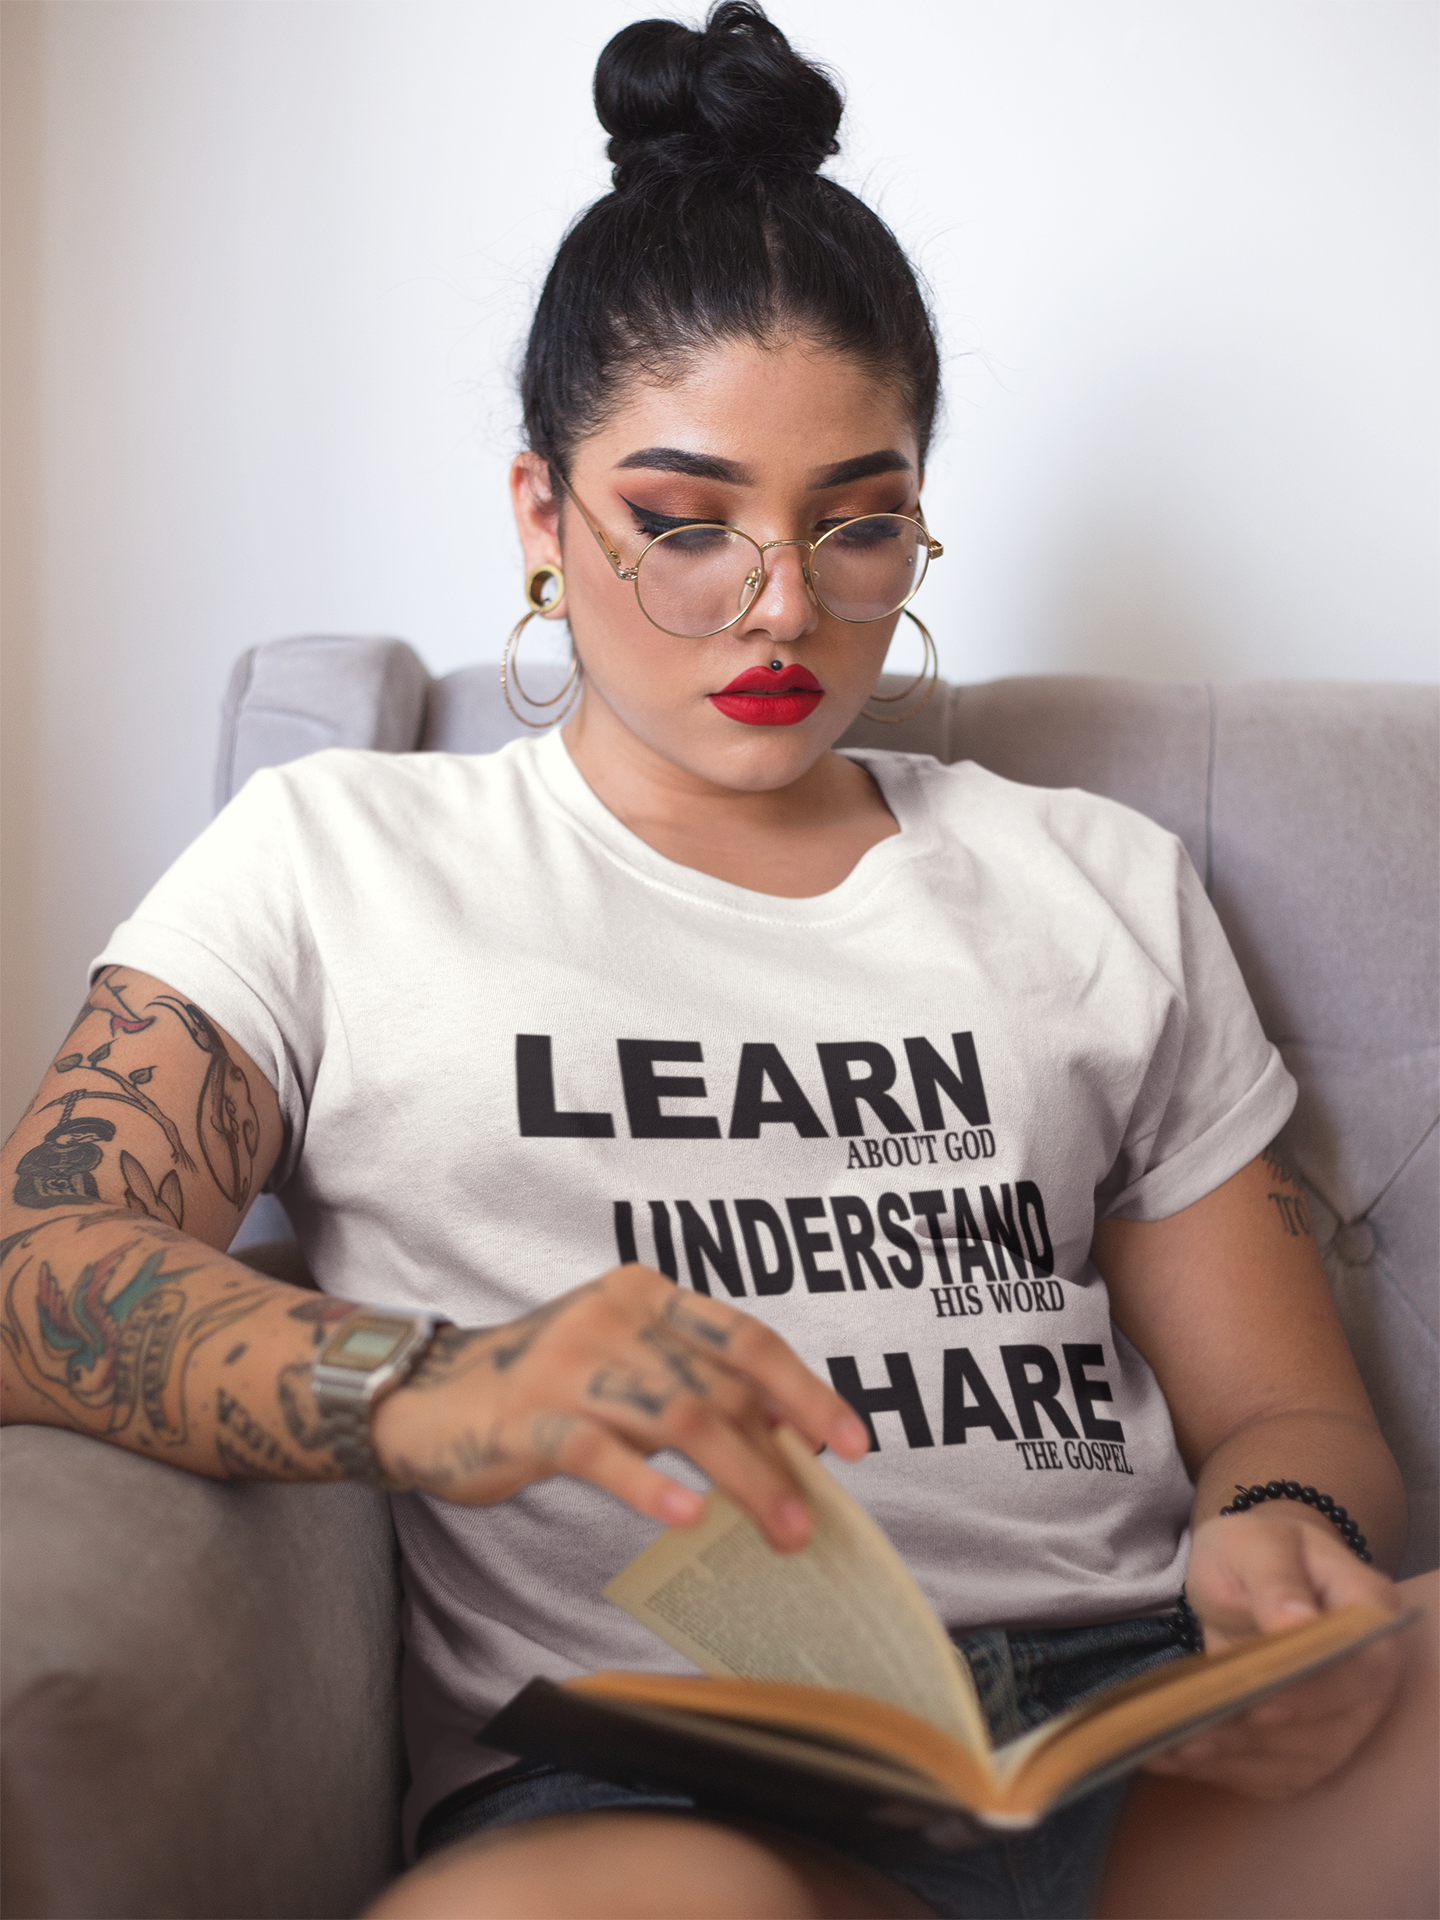 Learn, Understand, Share the Word T-shirt